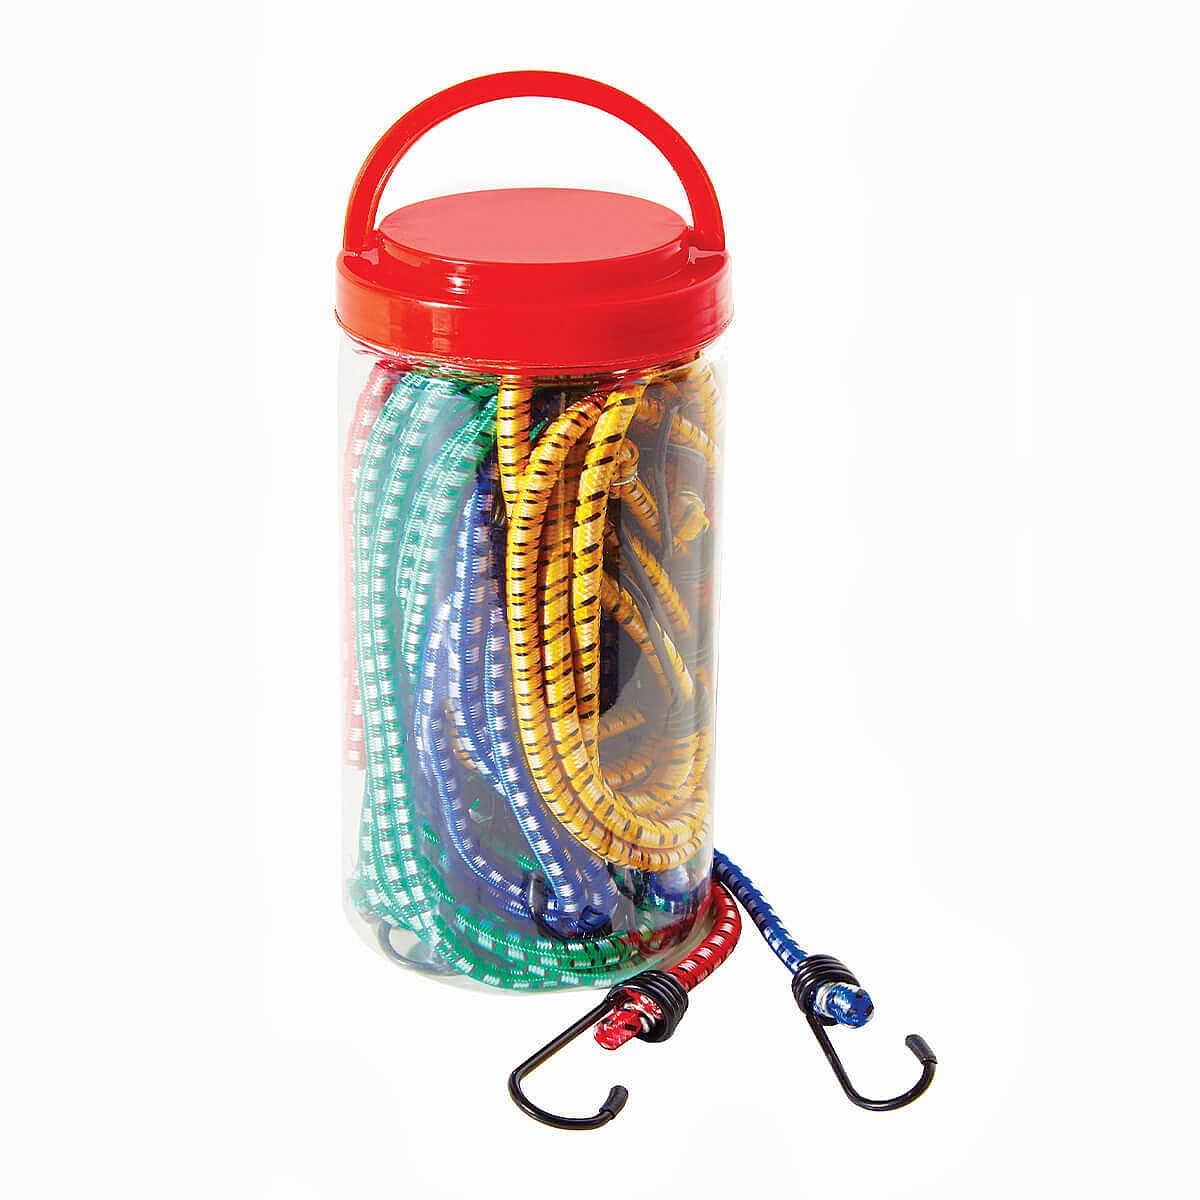 assorted length bungee cord